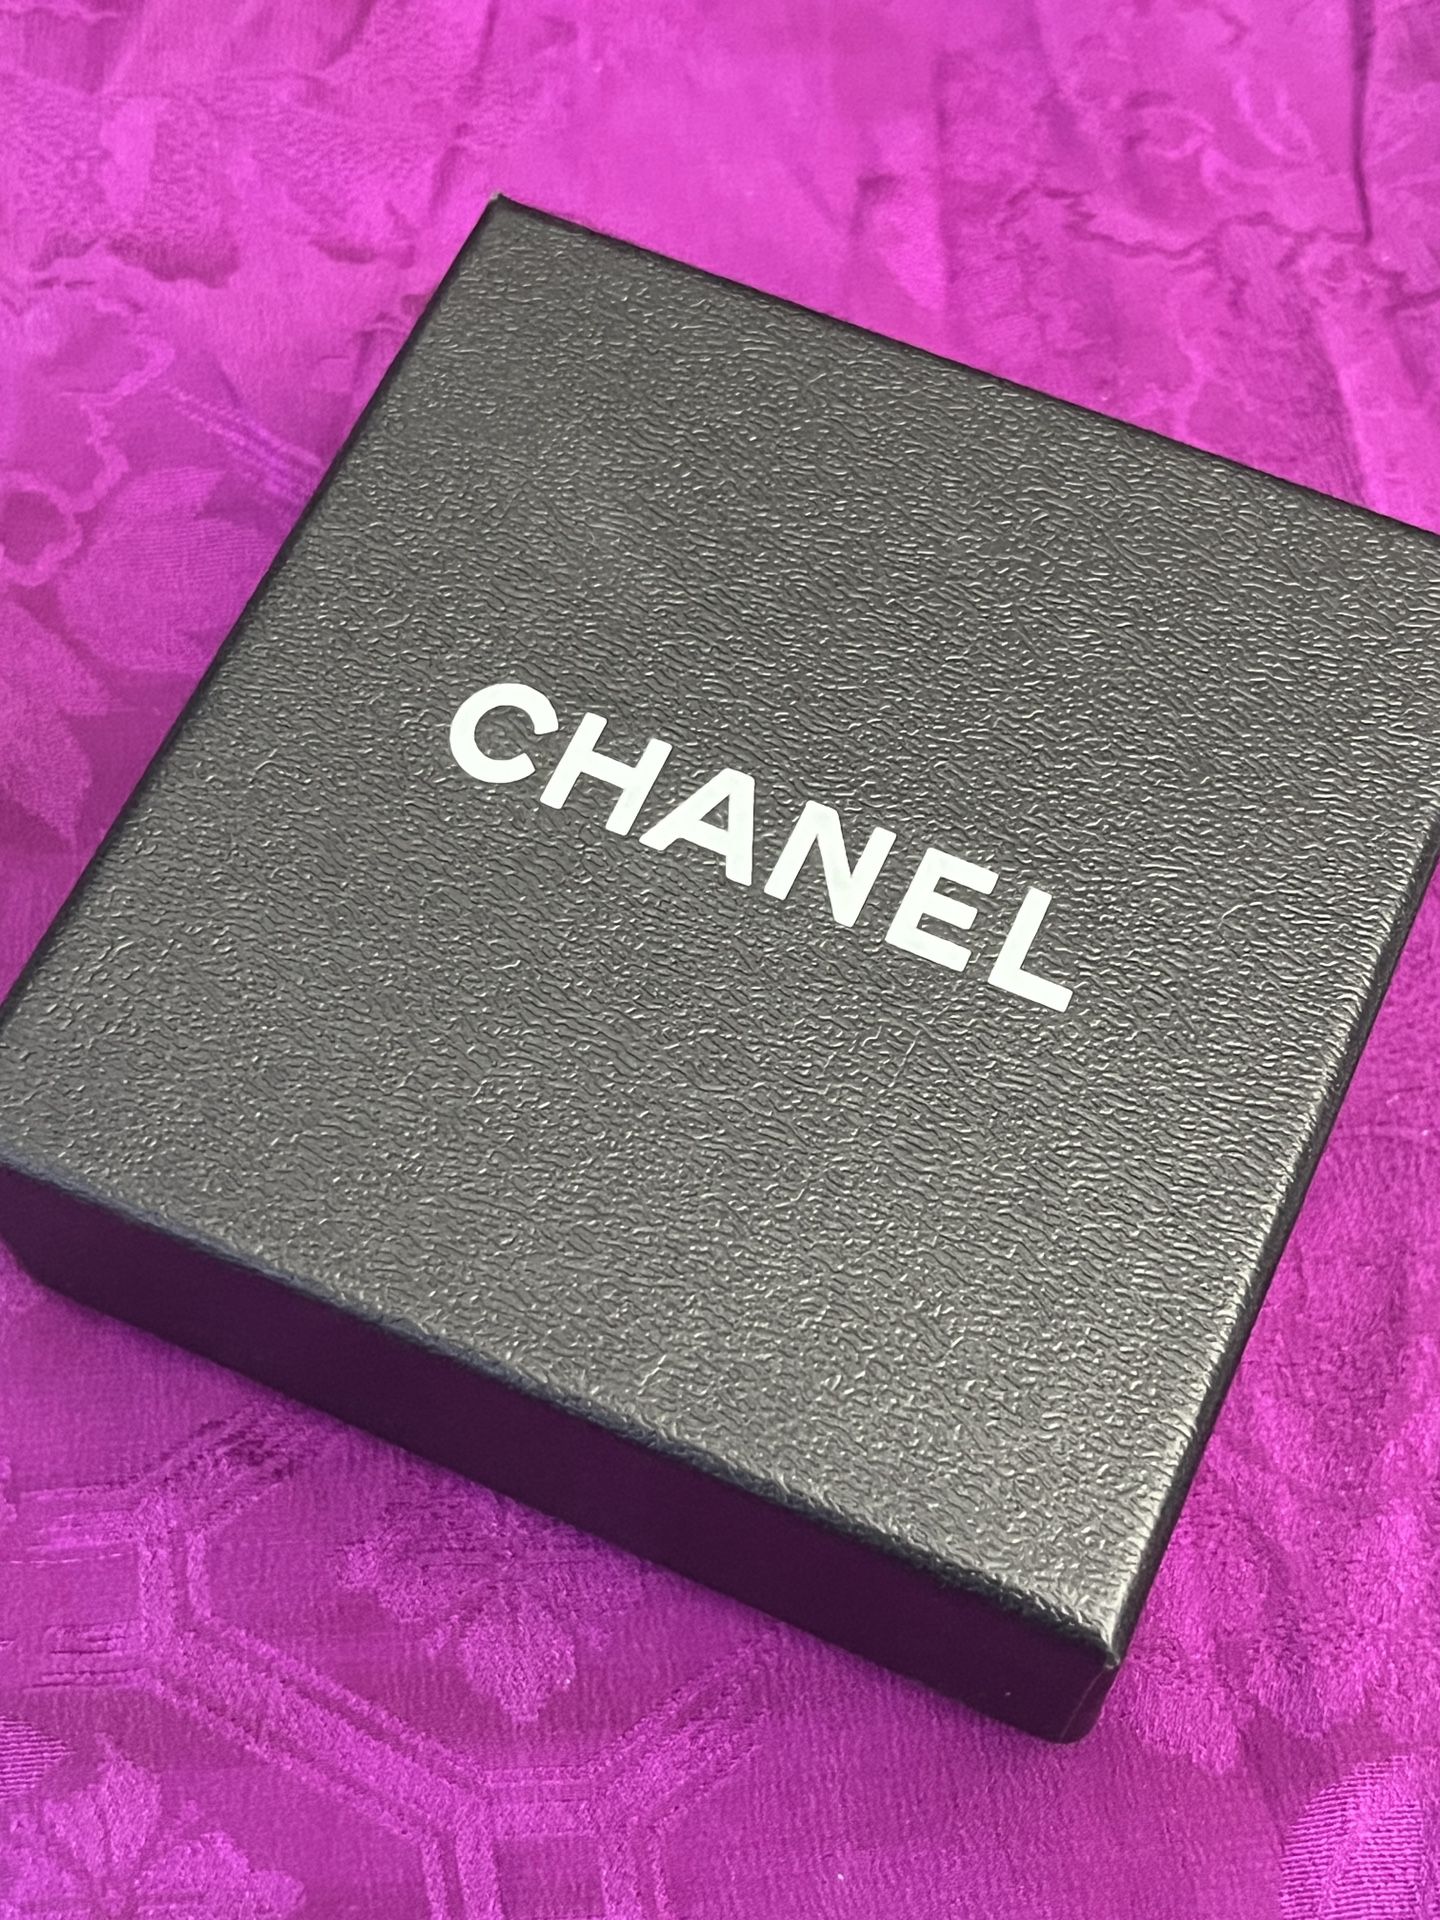 Chanel Jewelry Box And Paper Bag